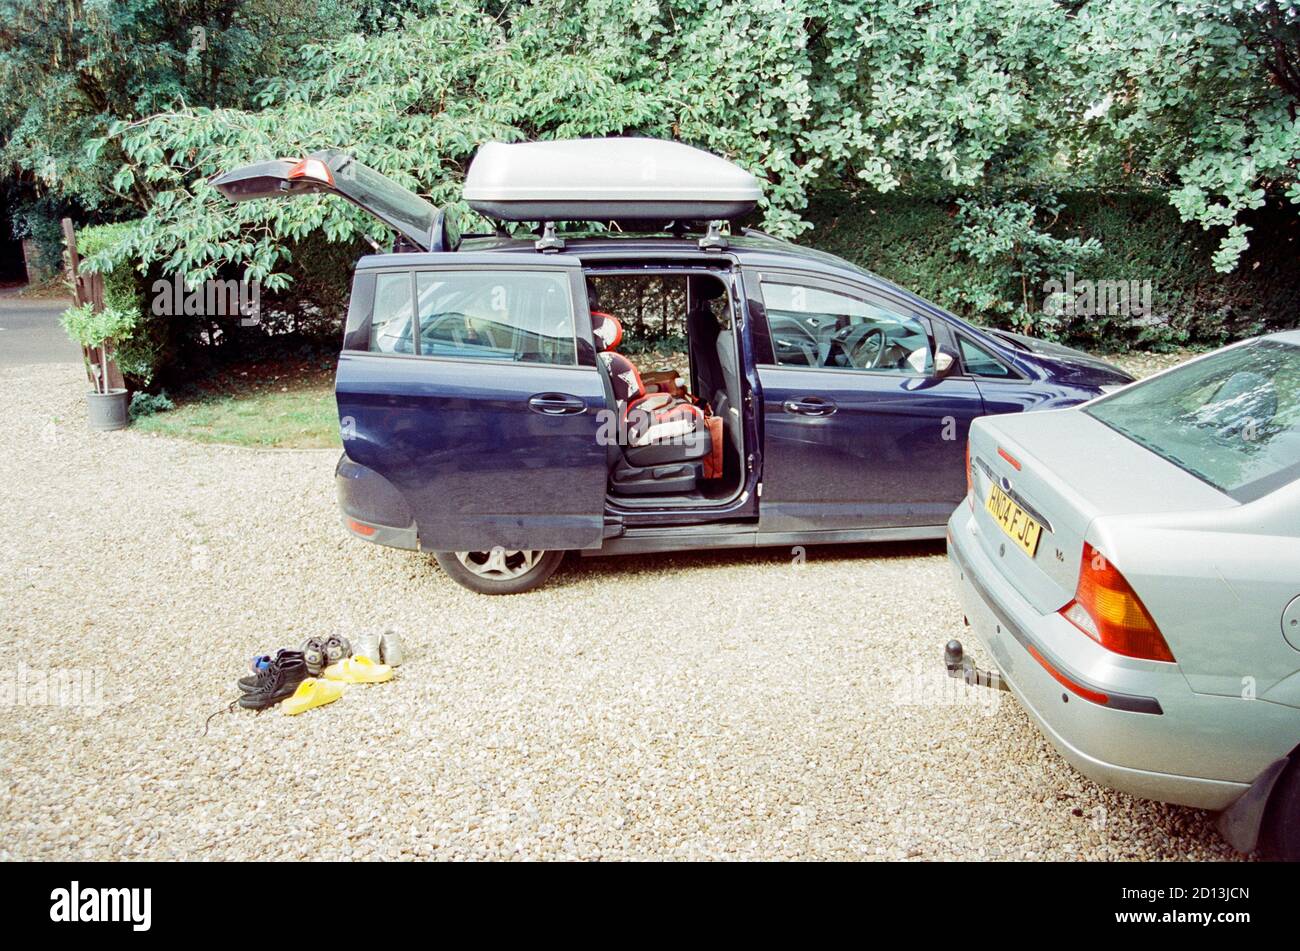 Packing up a family car to go away on holiday, Medstead, Alton, Hampshire, England, united Kingdom. Stock Photo